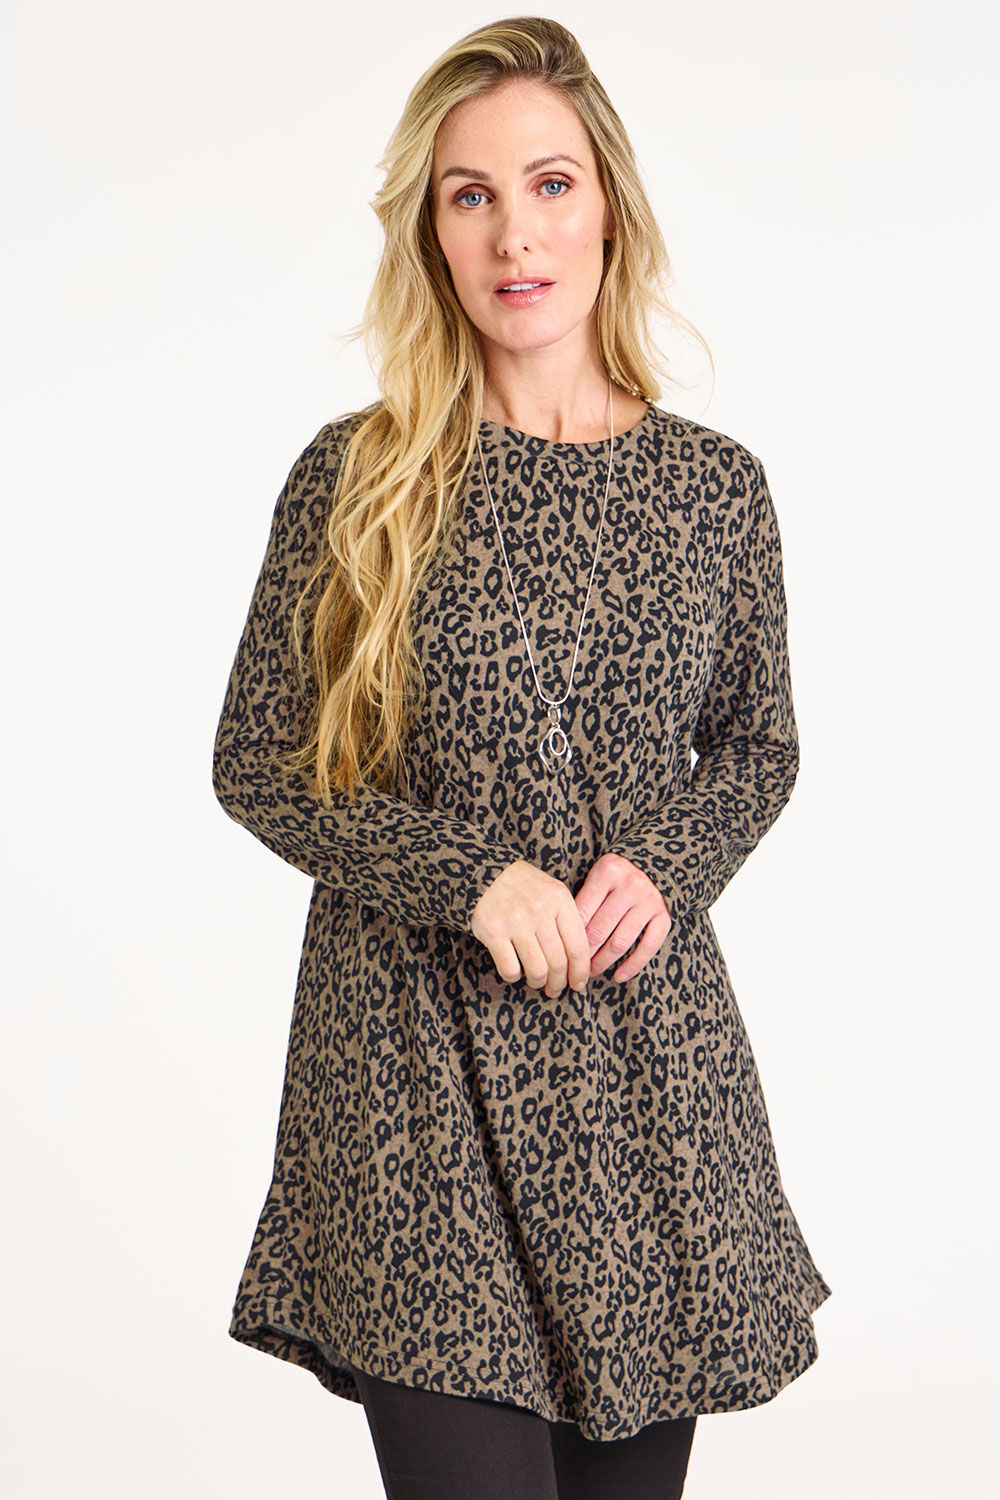 Bonmarche Women’s Brown and Black Animal Print Soft Touch Tunic Dress, Size: M